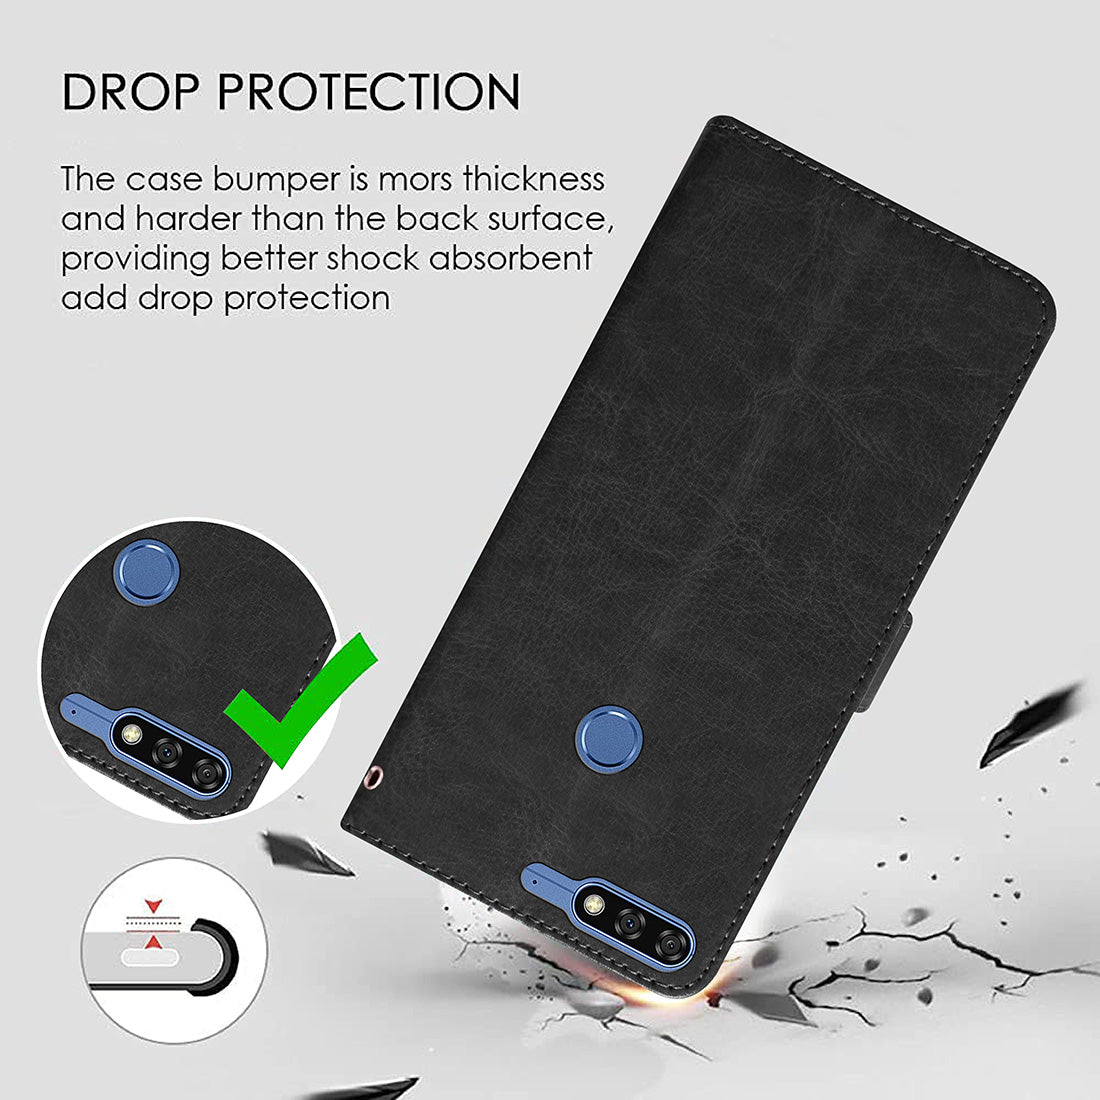 Premium Wallet Flip Cover for Huawei Honor 7A